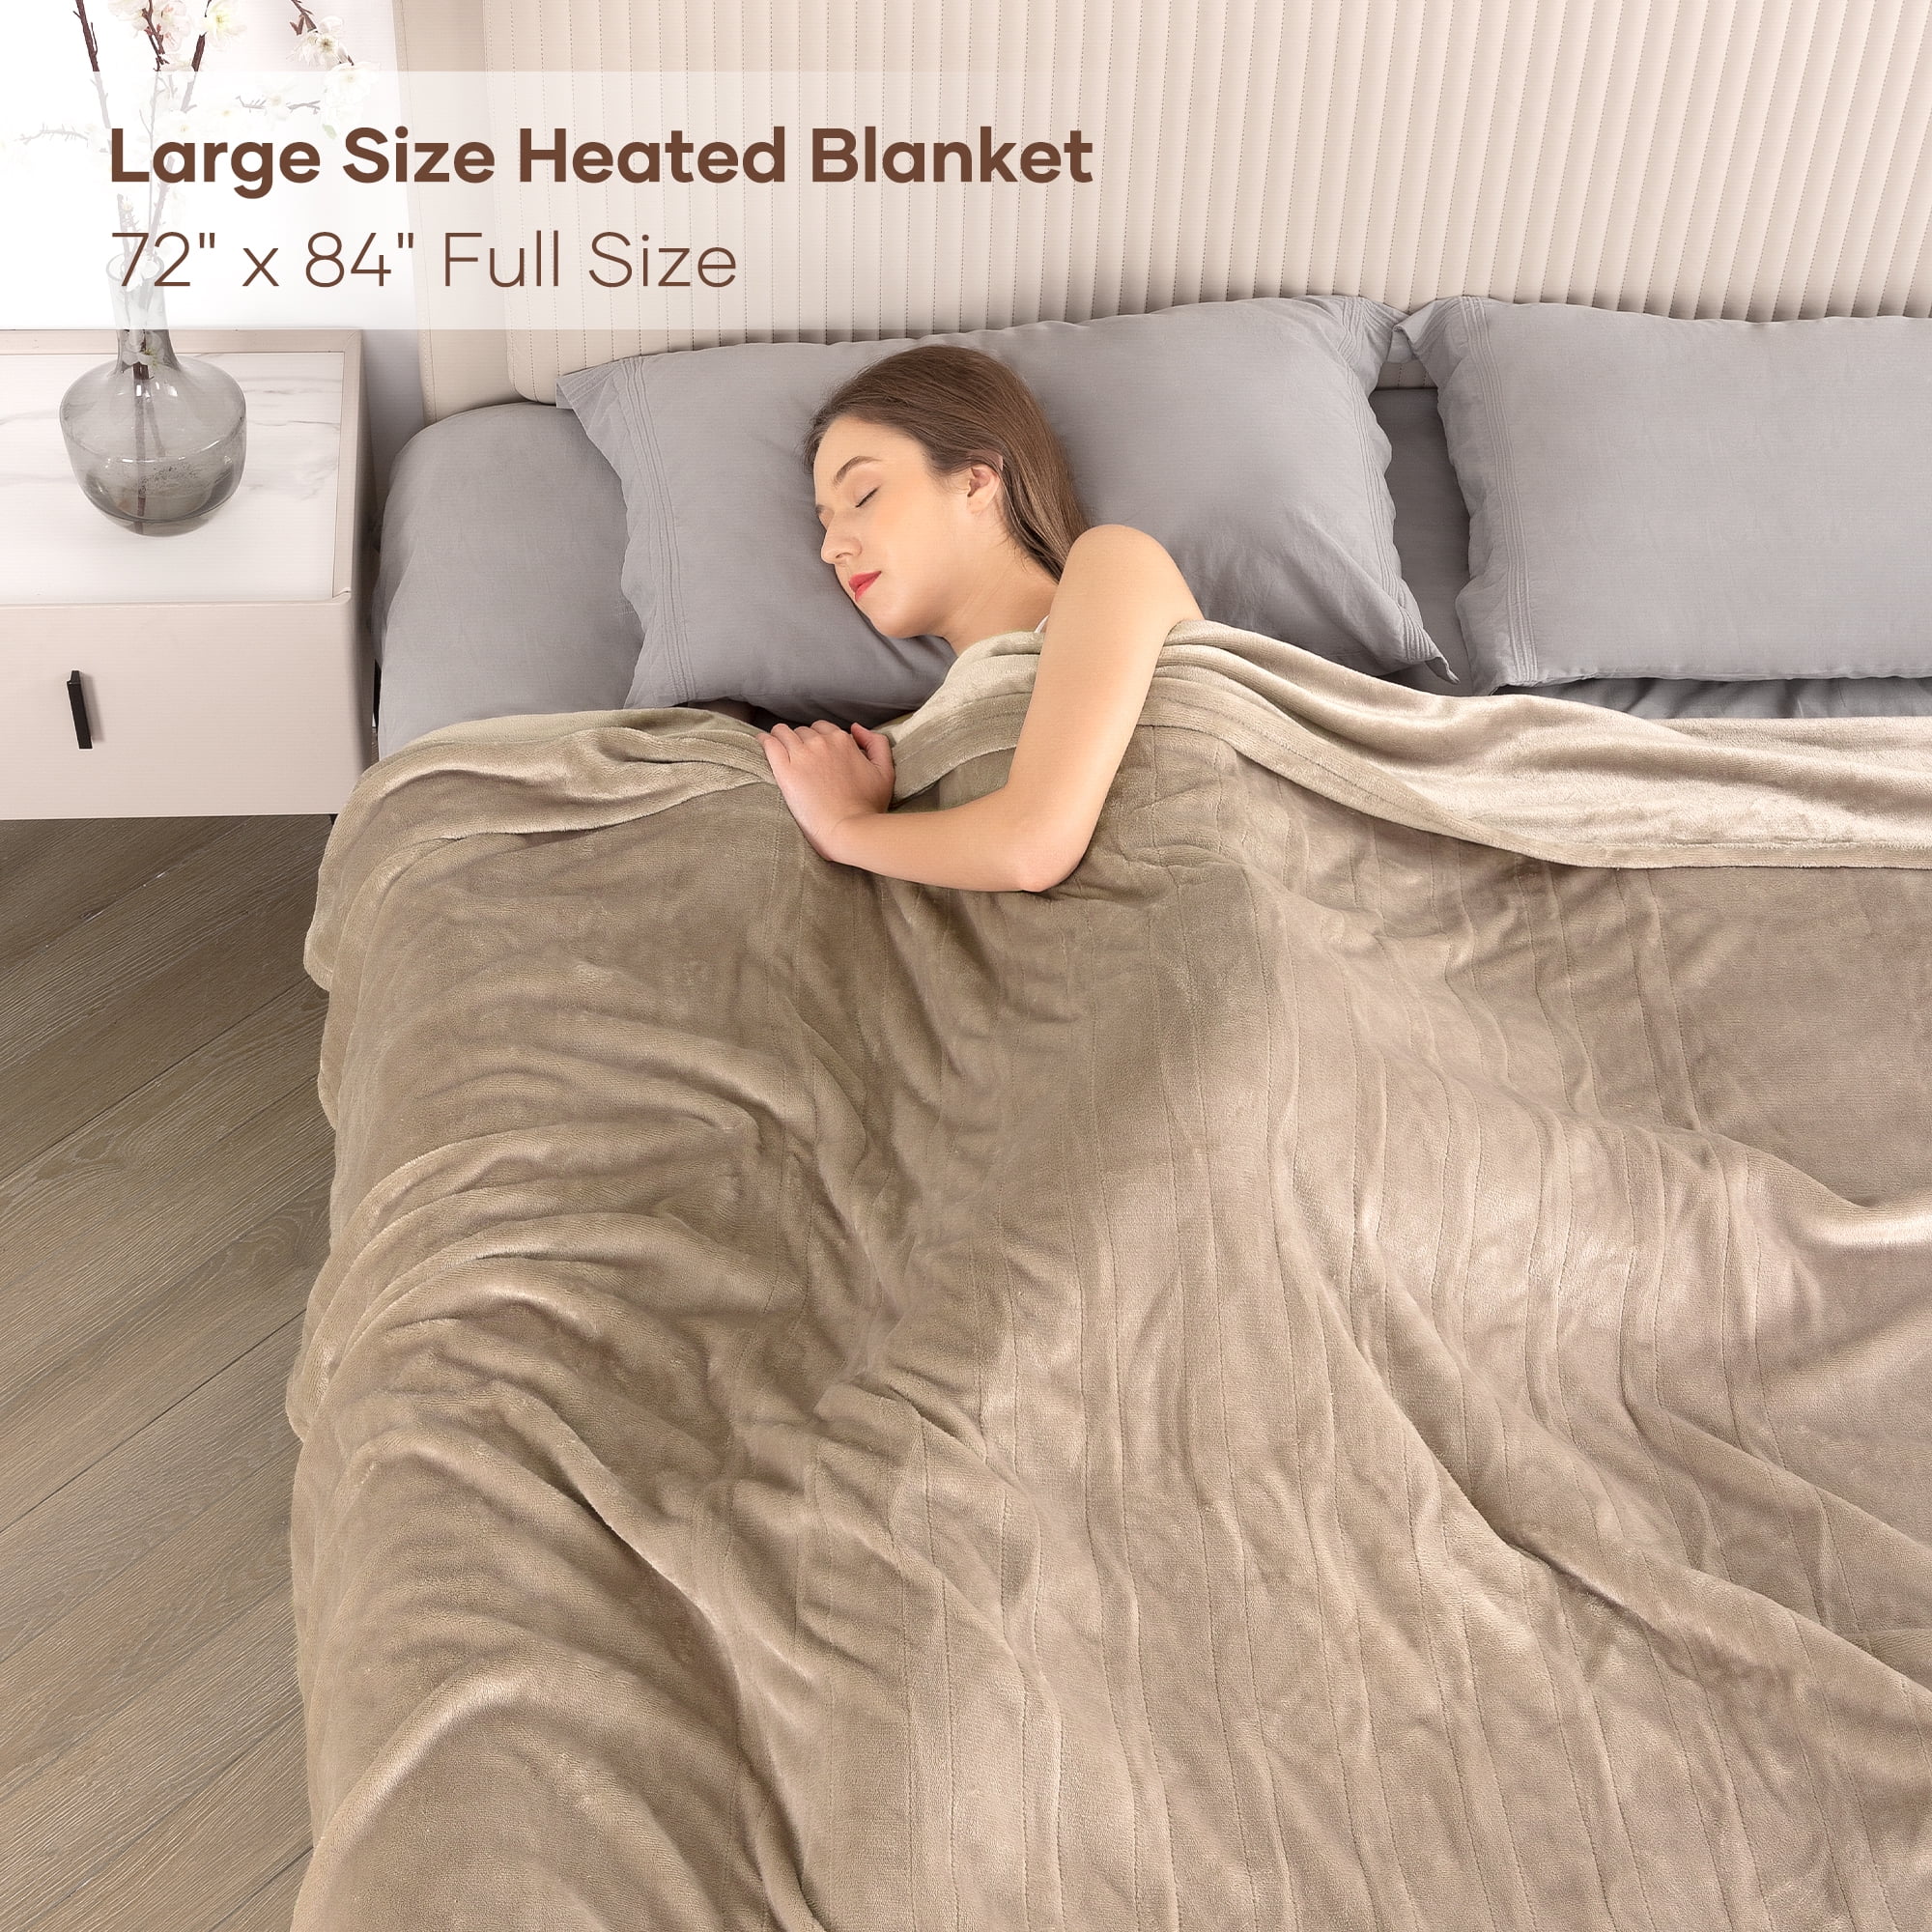  Electric Heated Blanket 72x84 Full Size with 4